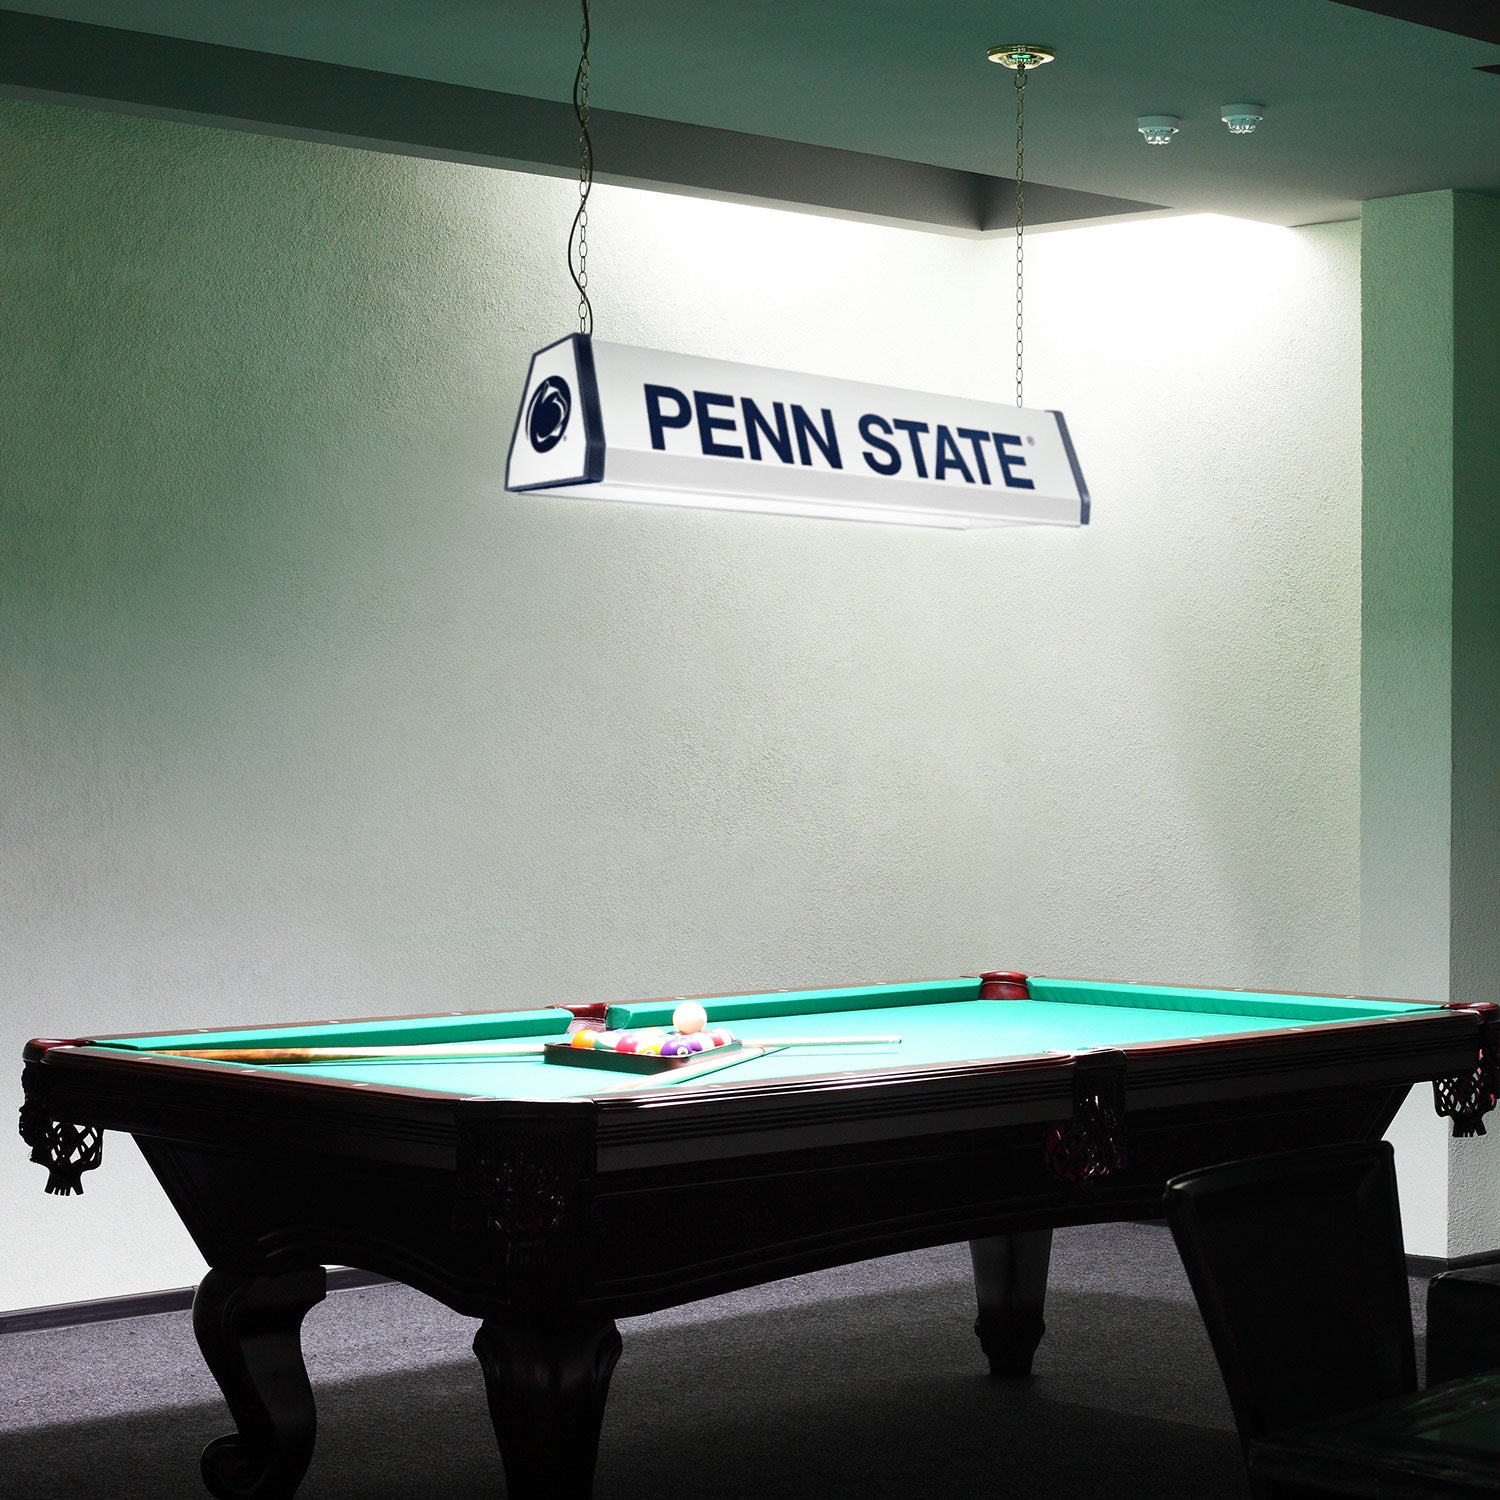 Penn State Nittany Lions Standard Pool Table Light Room View